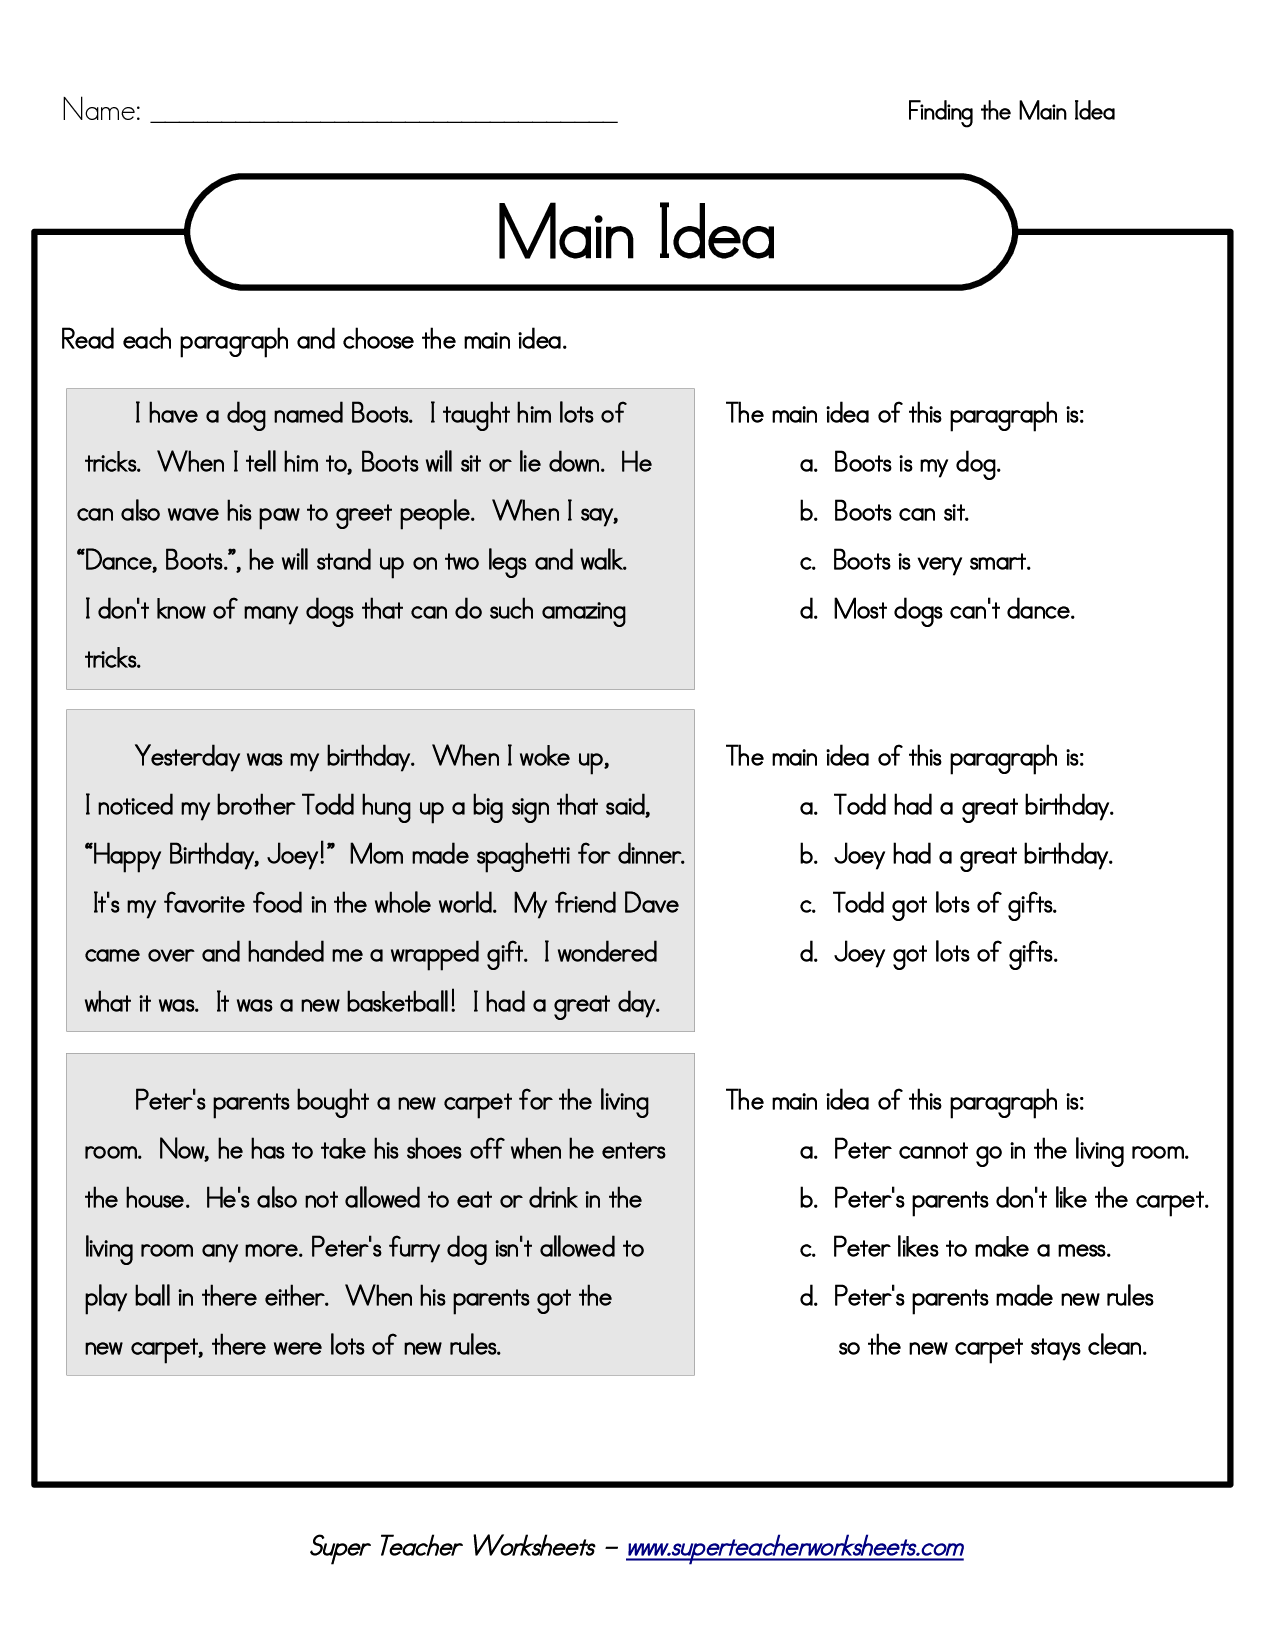 15-best-images-of-main-idea-supporting-detail-worksheets-main-idea-passages-nonfiction-main